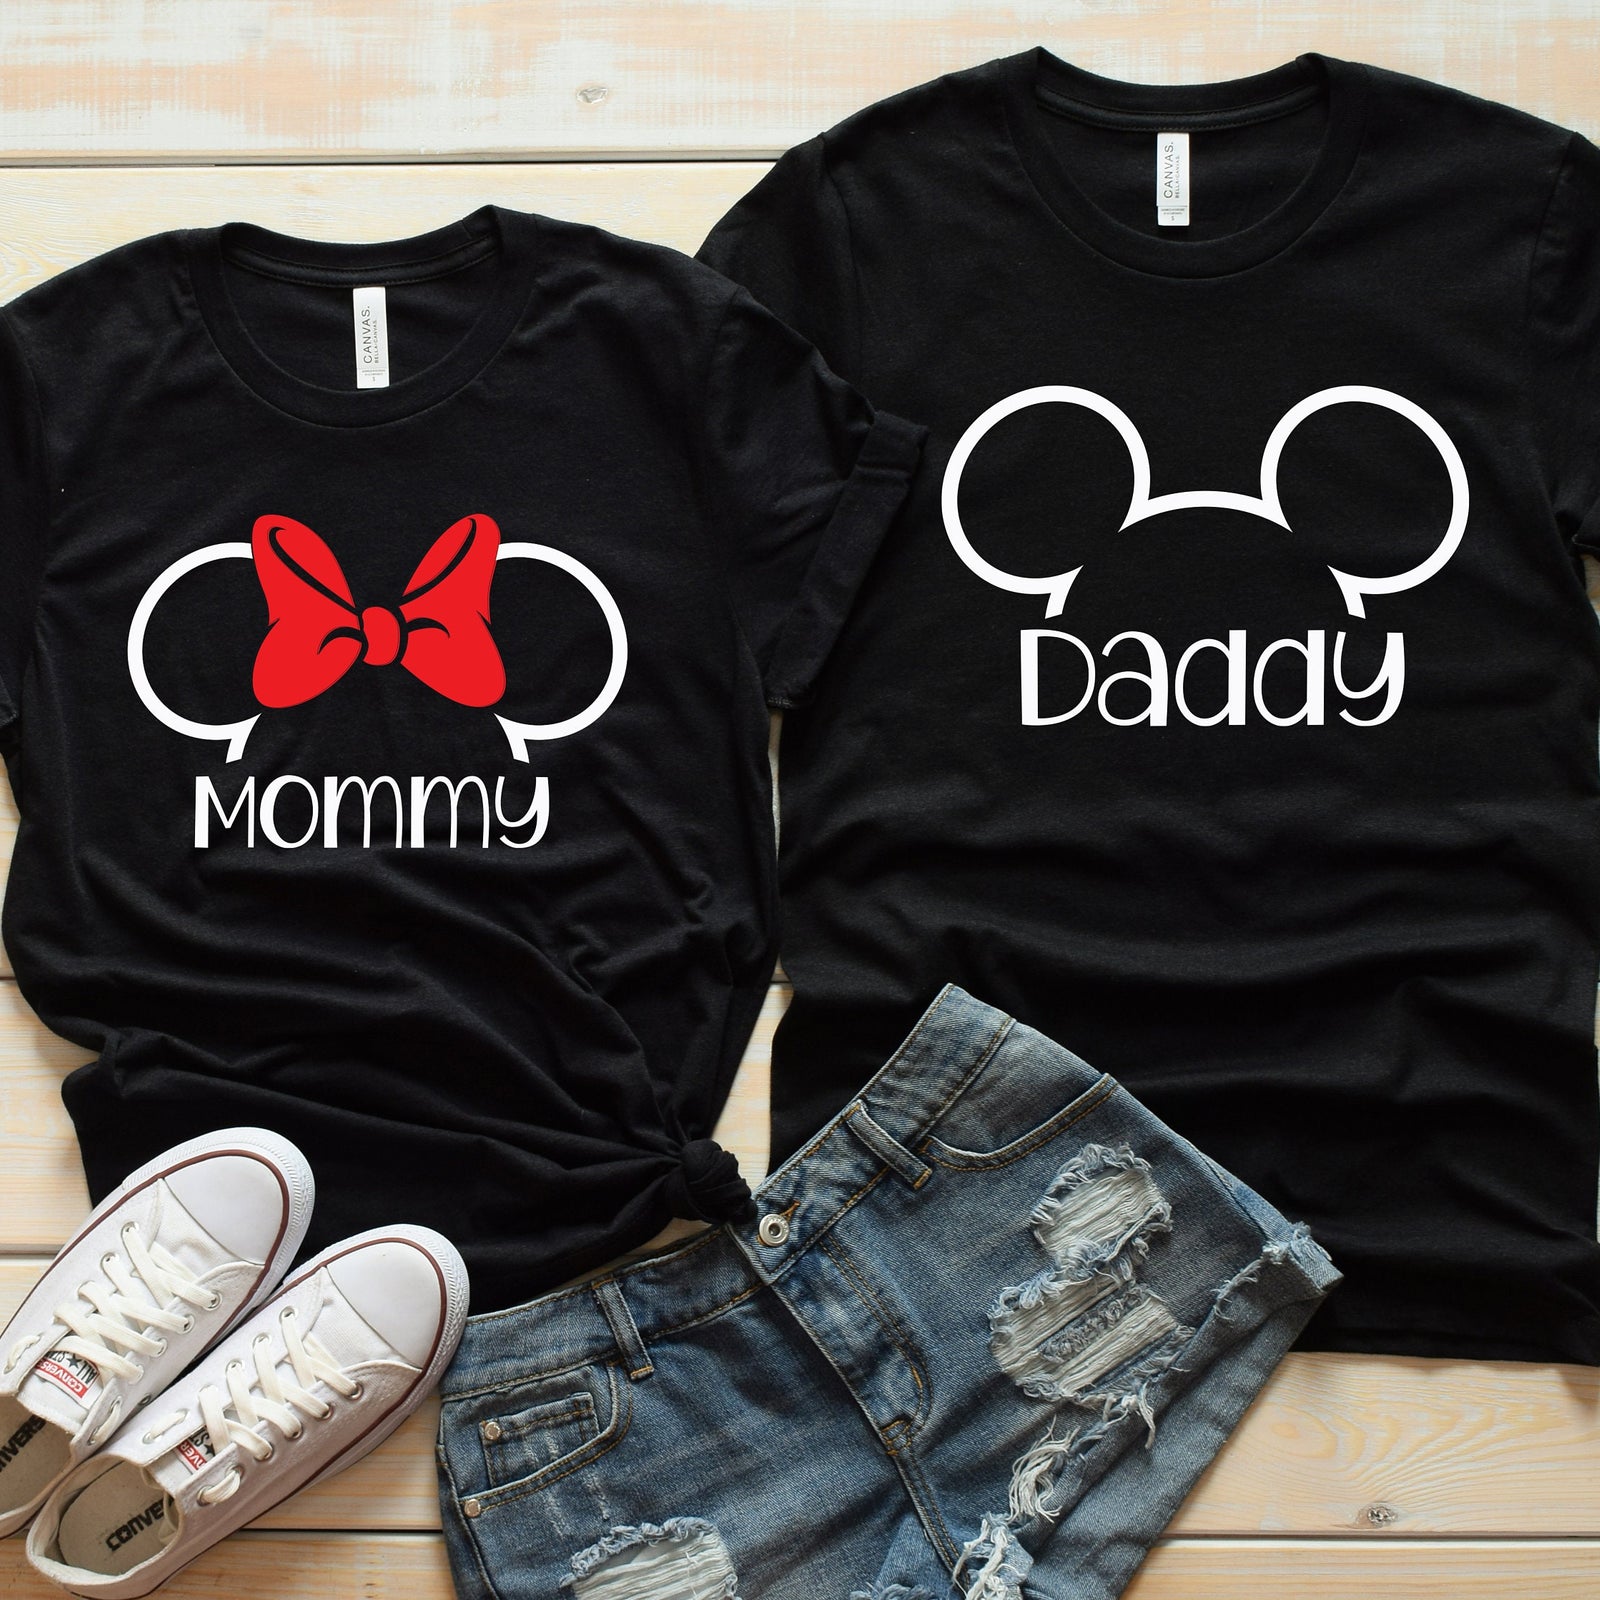 Mommy and Daddy Matching Disney Shirts - Disney Couples - Mickey and Minnie Mouse Ears Outline